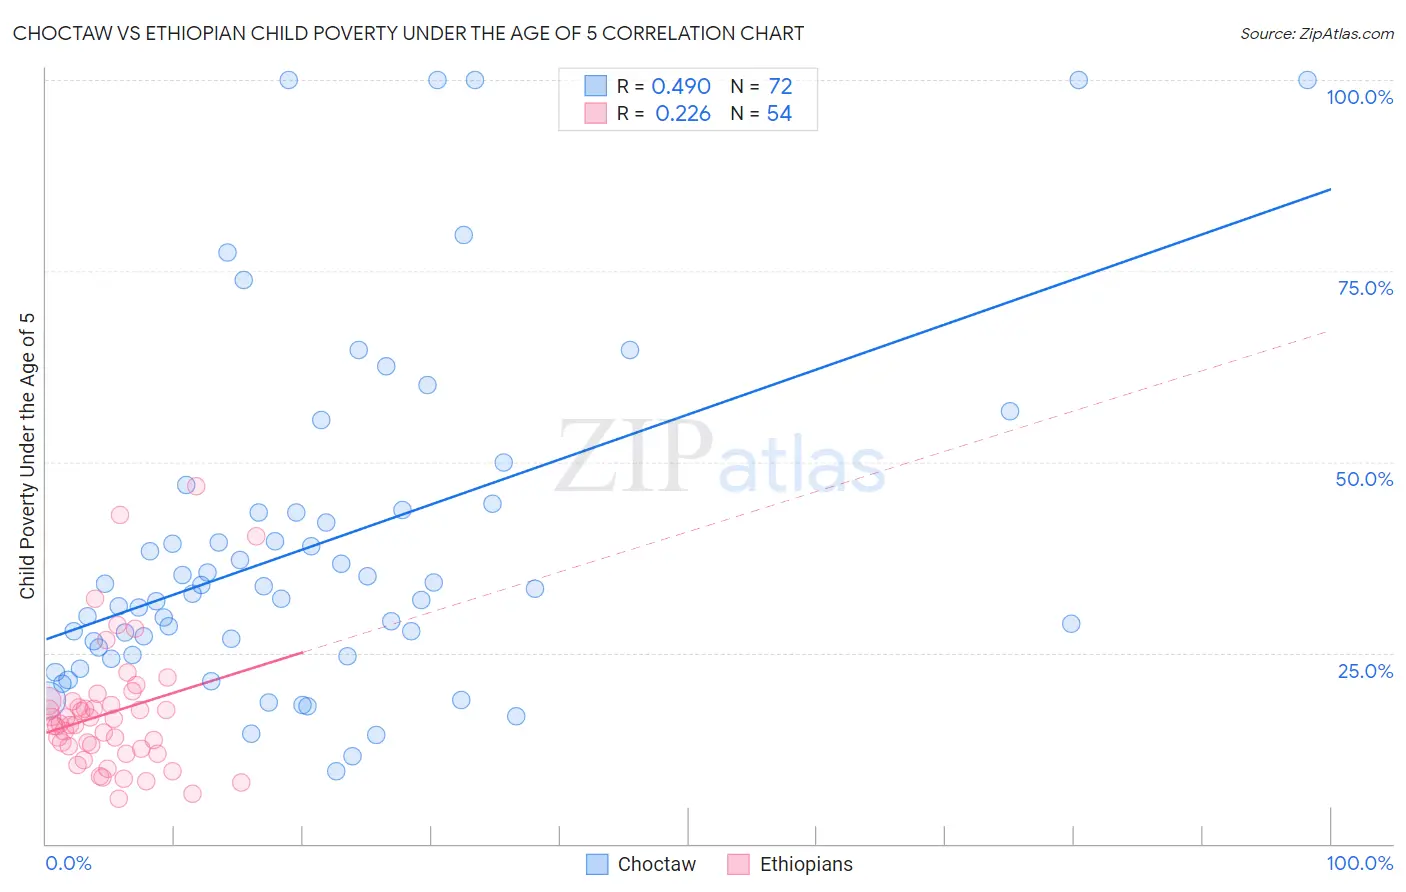 Choctaw vs Ethiopian Child Poverty Under the Age of 5